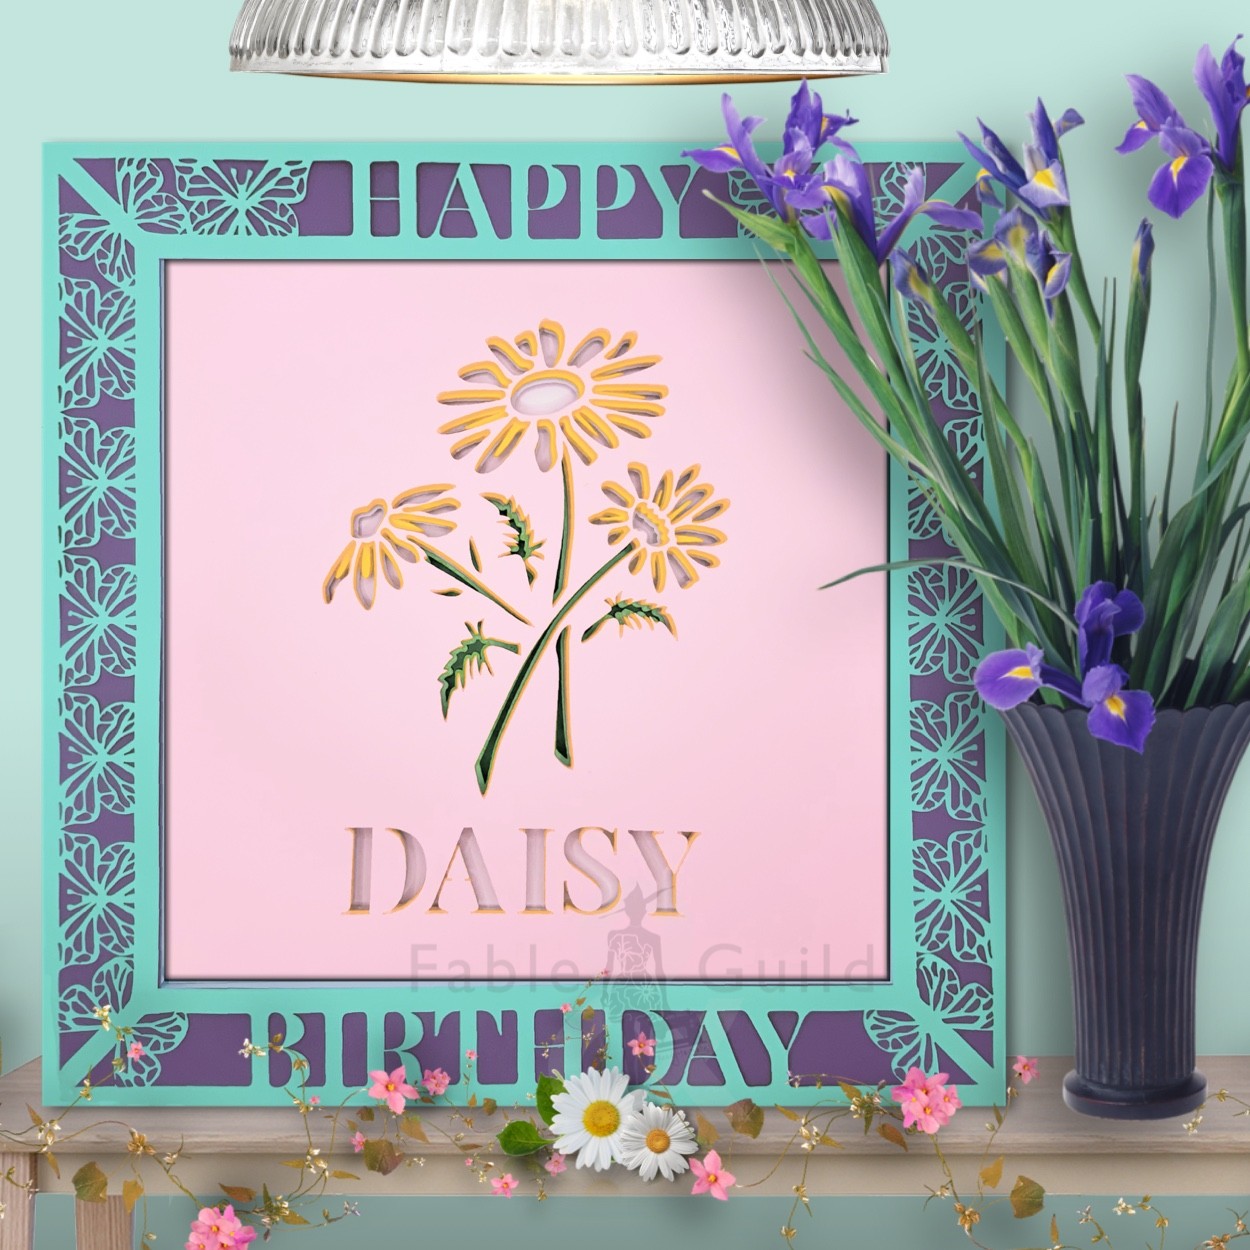 Download 3D Butterfly Celebration SVG Shadow Box Picture Frame ...